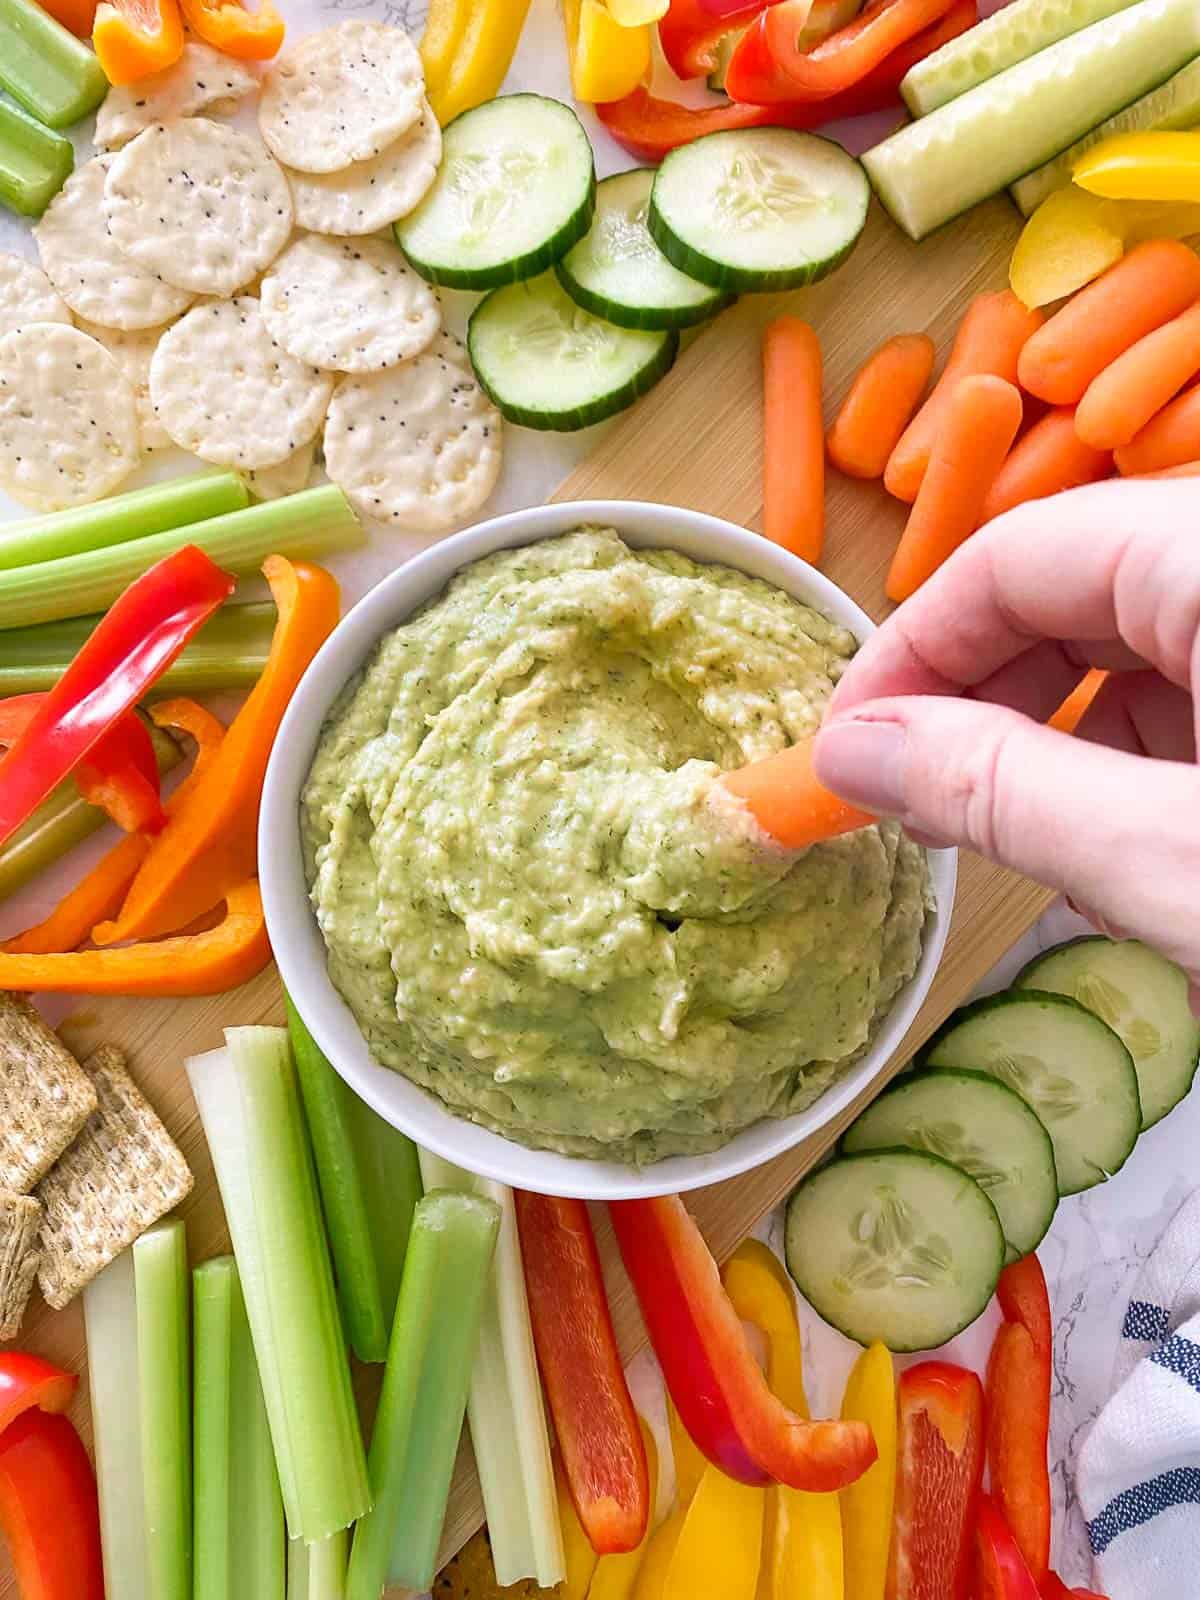 Hand dipping carrot stick into bowl of green dip.